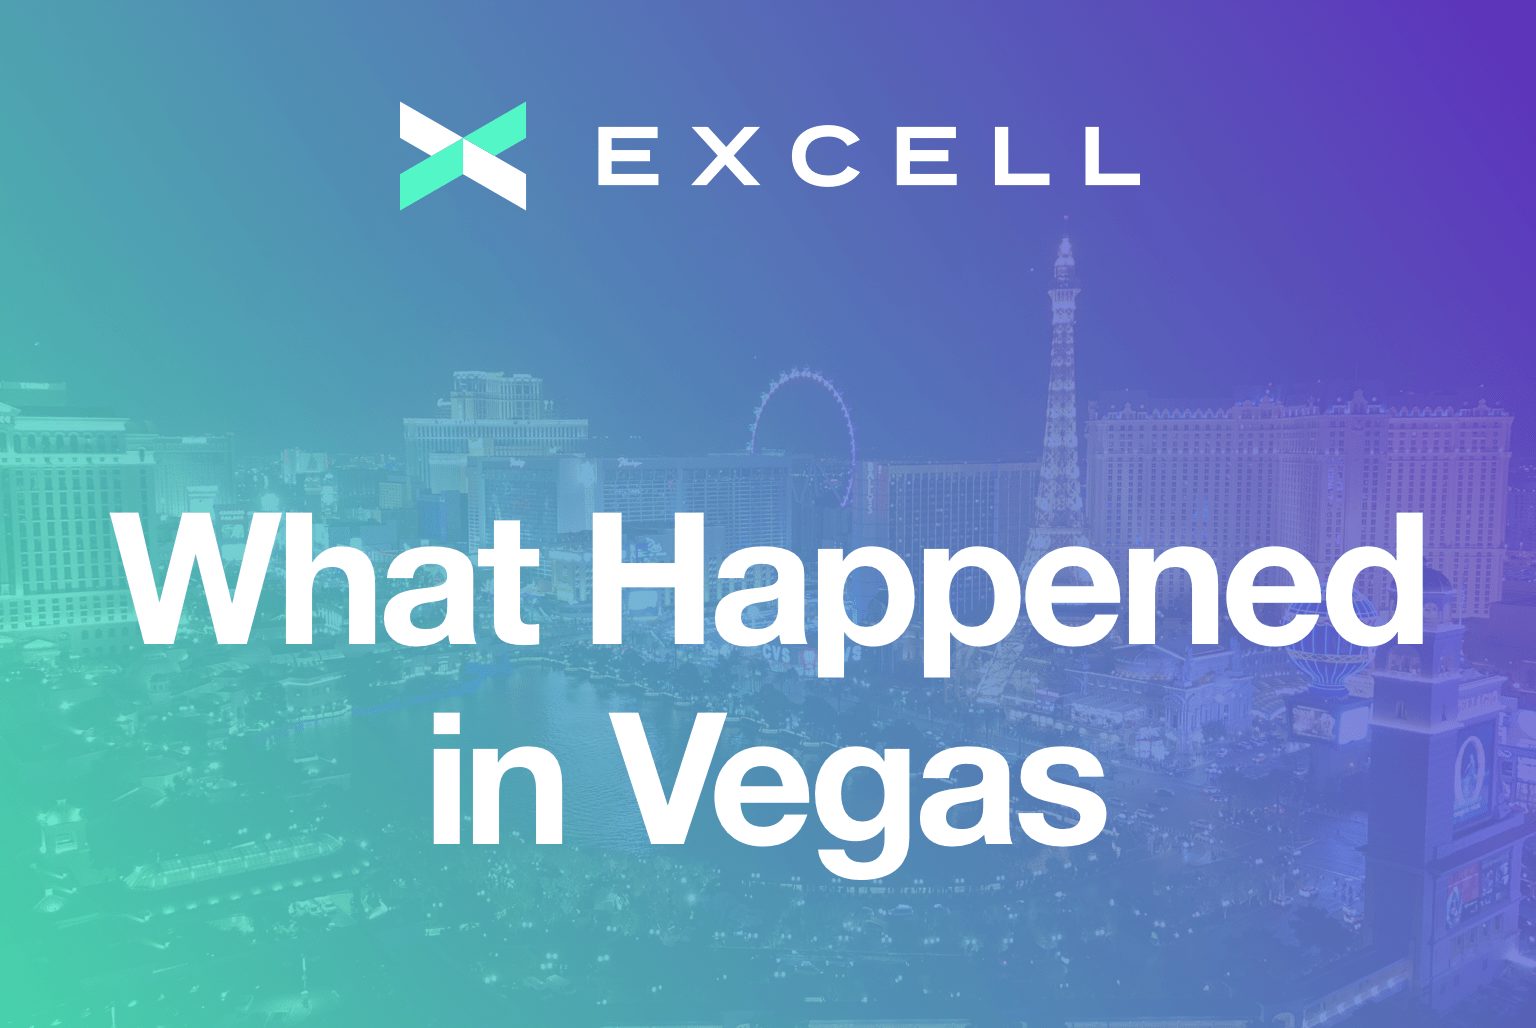 Excell 2019 financial advisor conference events